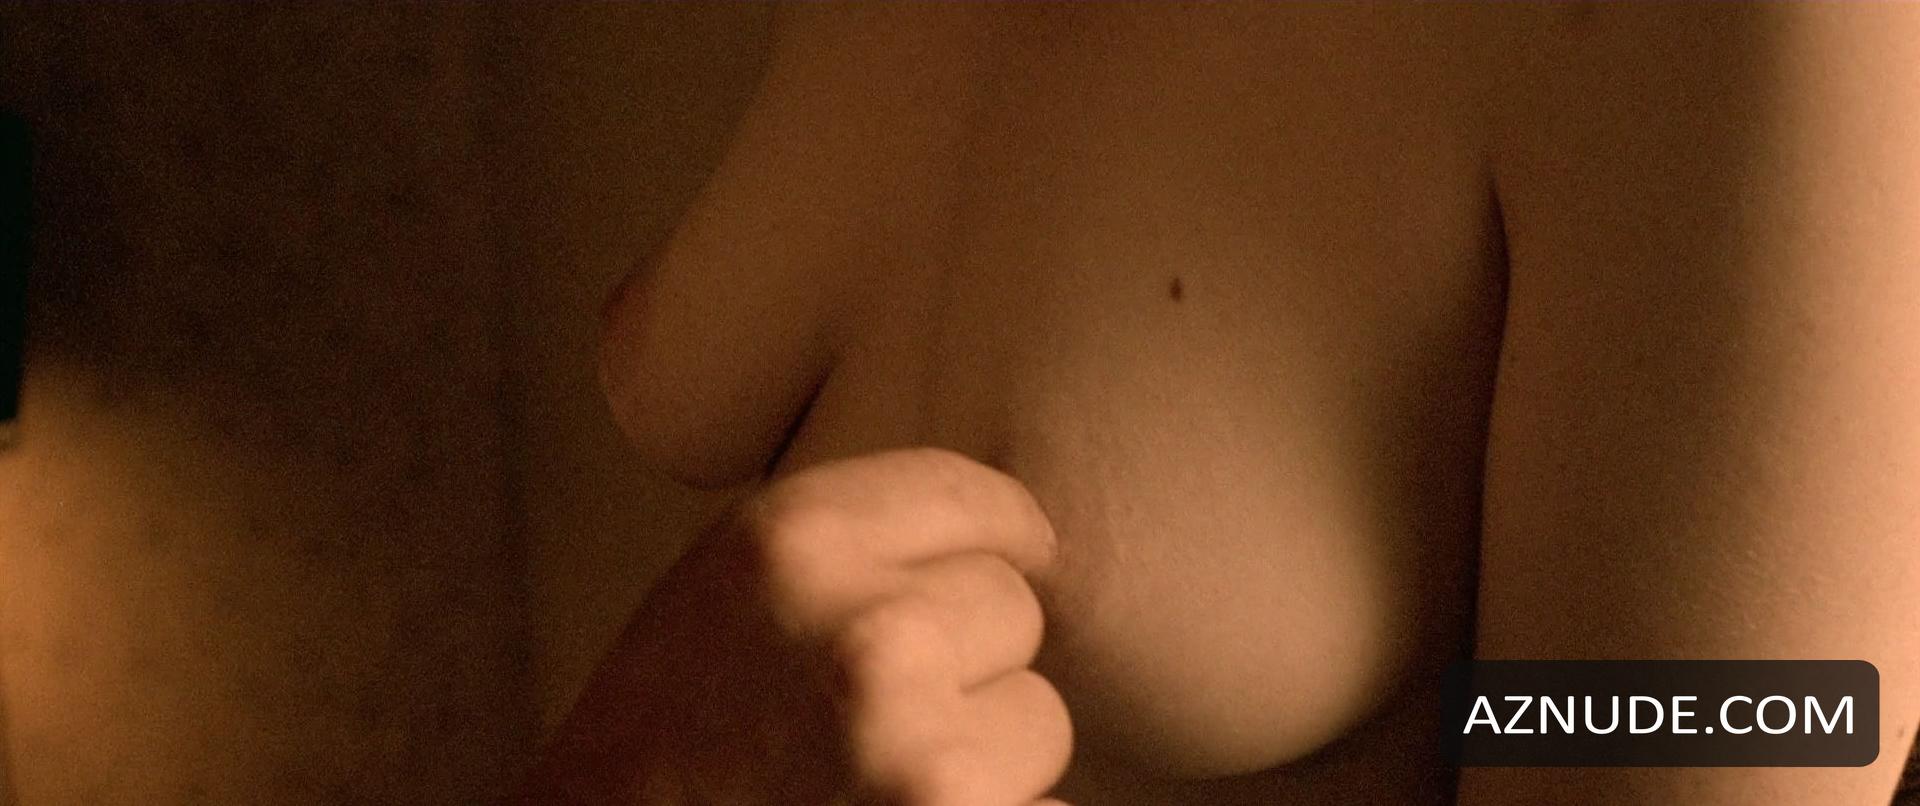 Browse Celebrity Pinching Nipple Images Page 1 Aznude